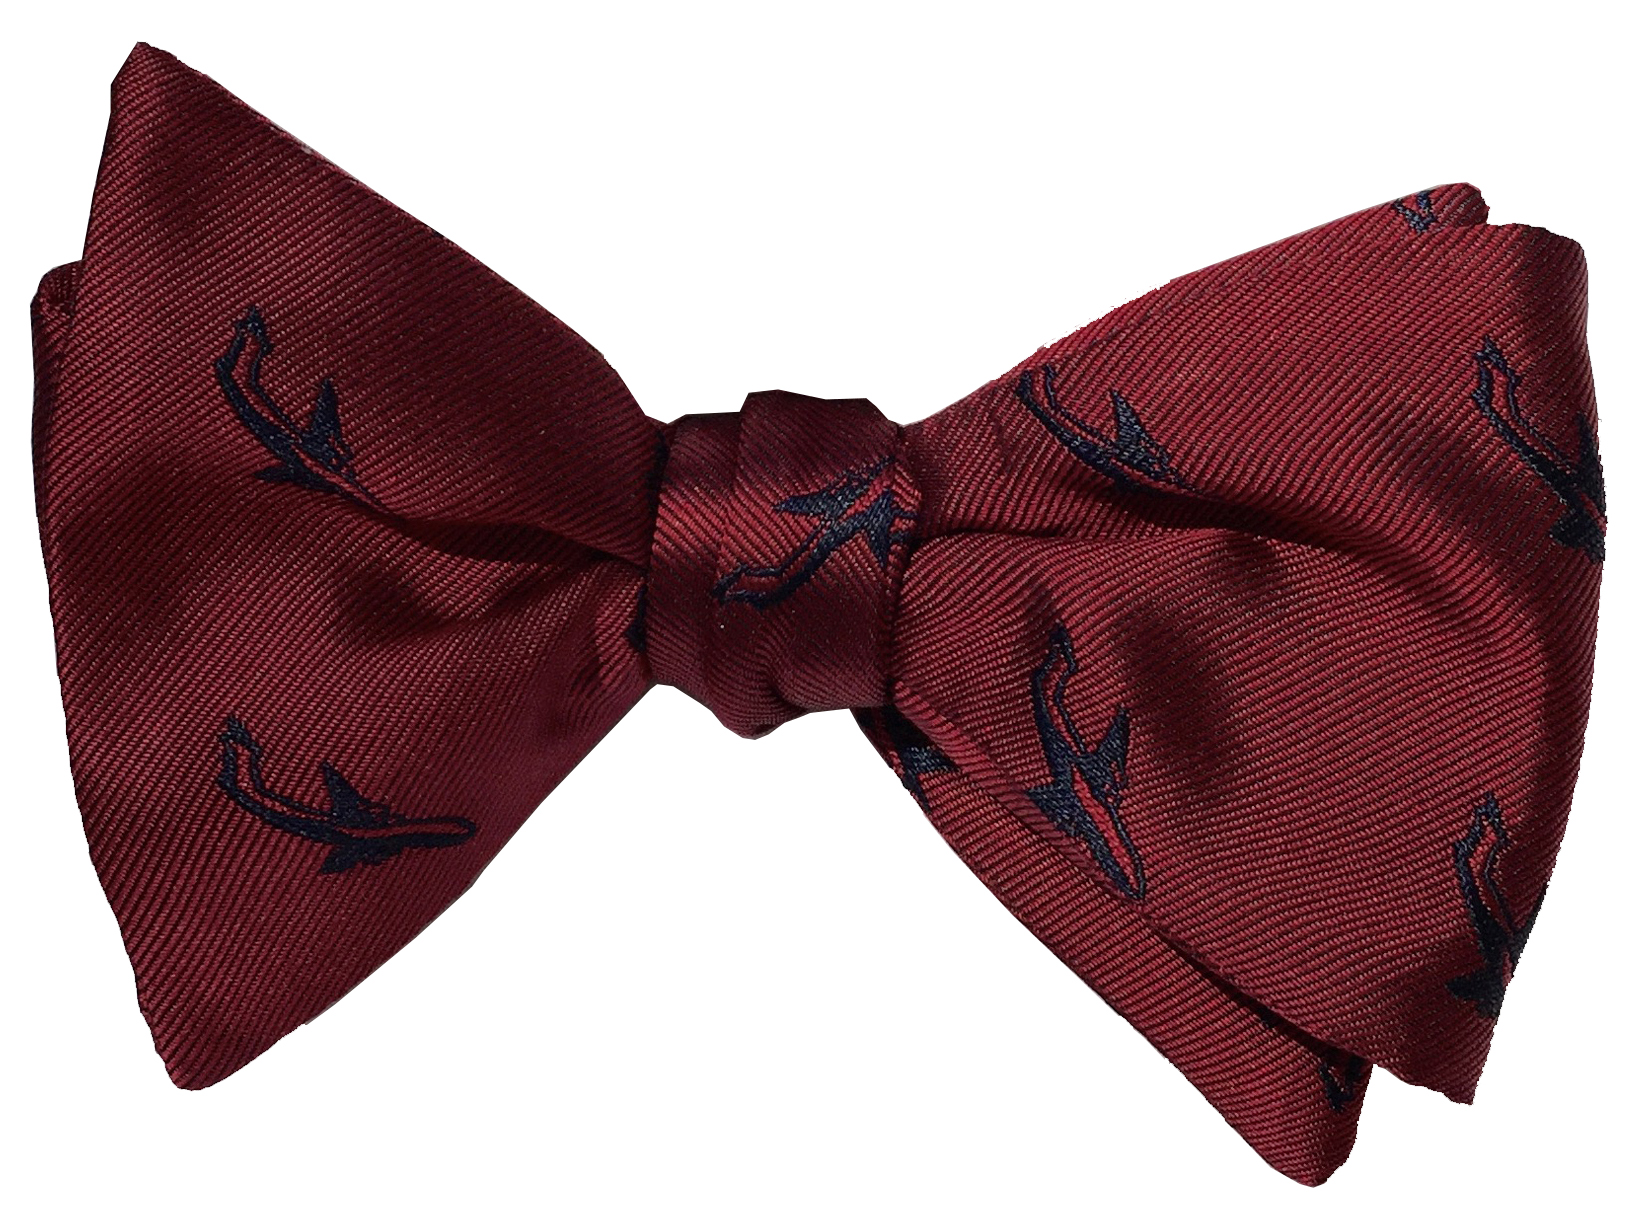 C-5 Galaxy airlifter bow tie in ruby